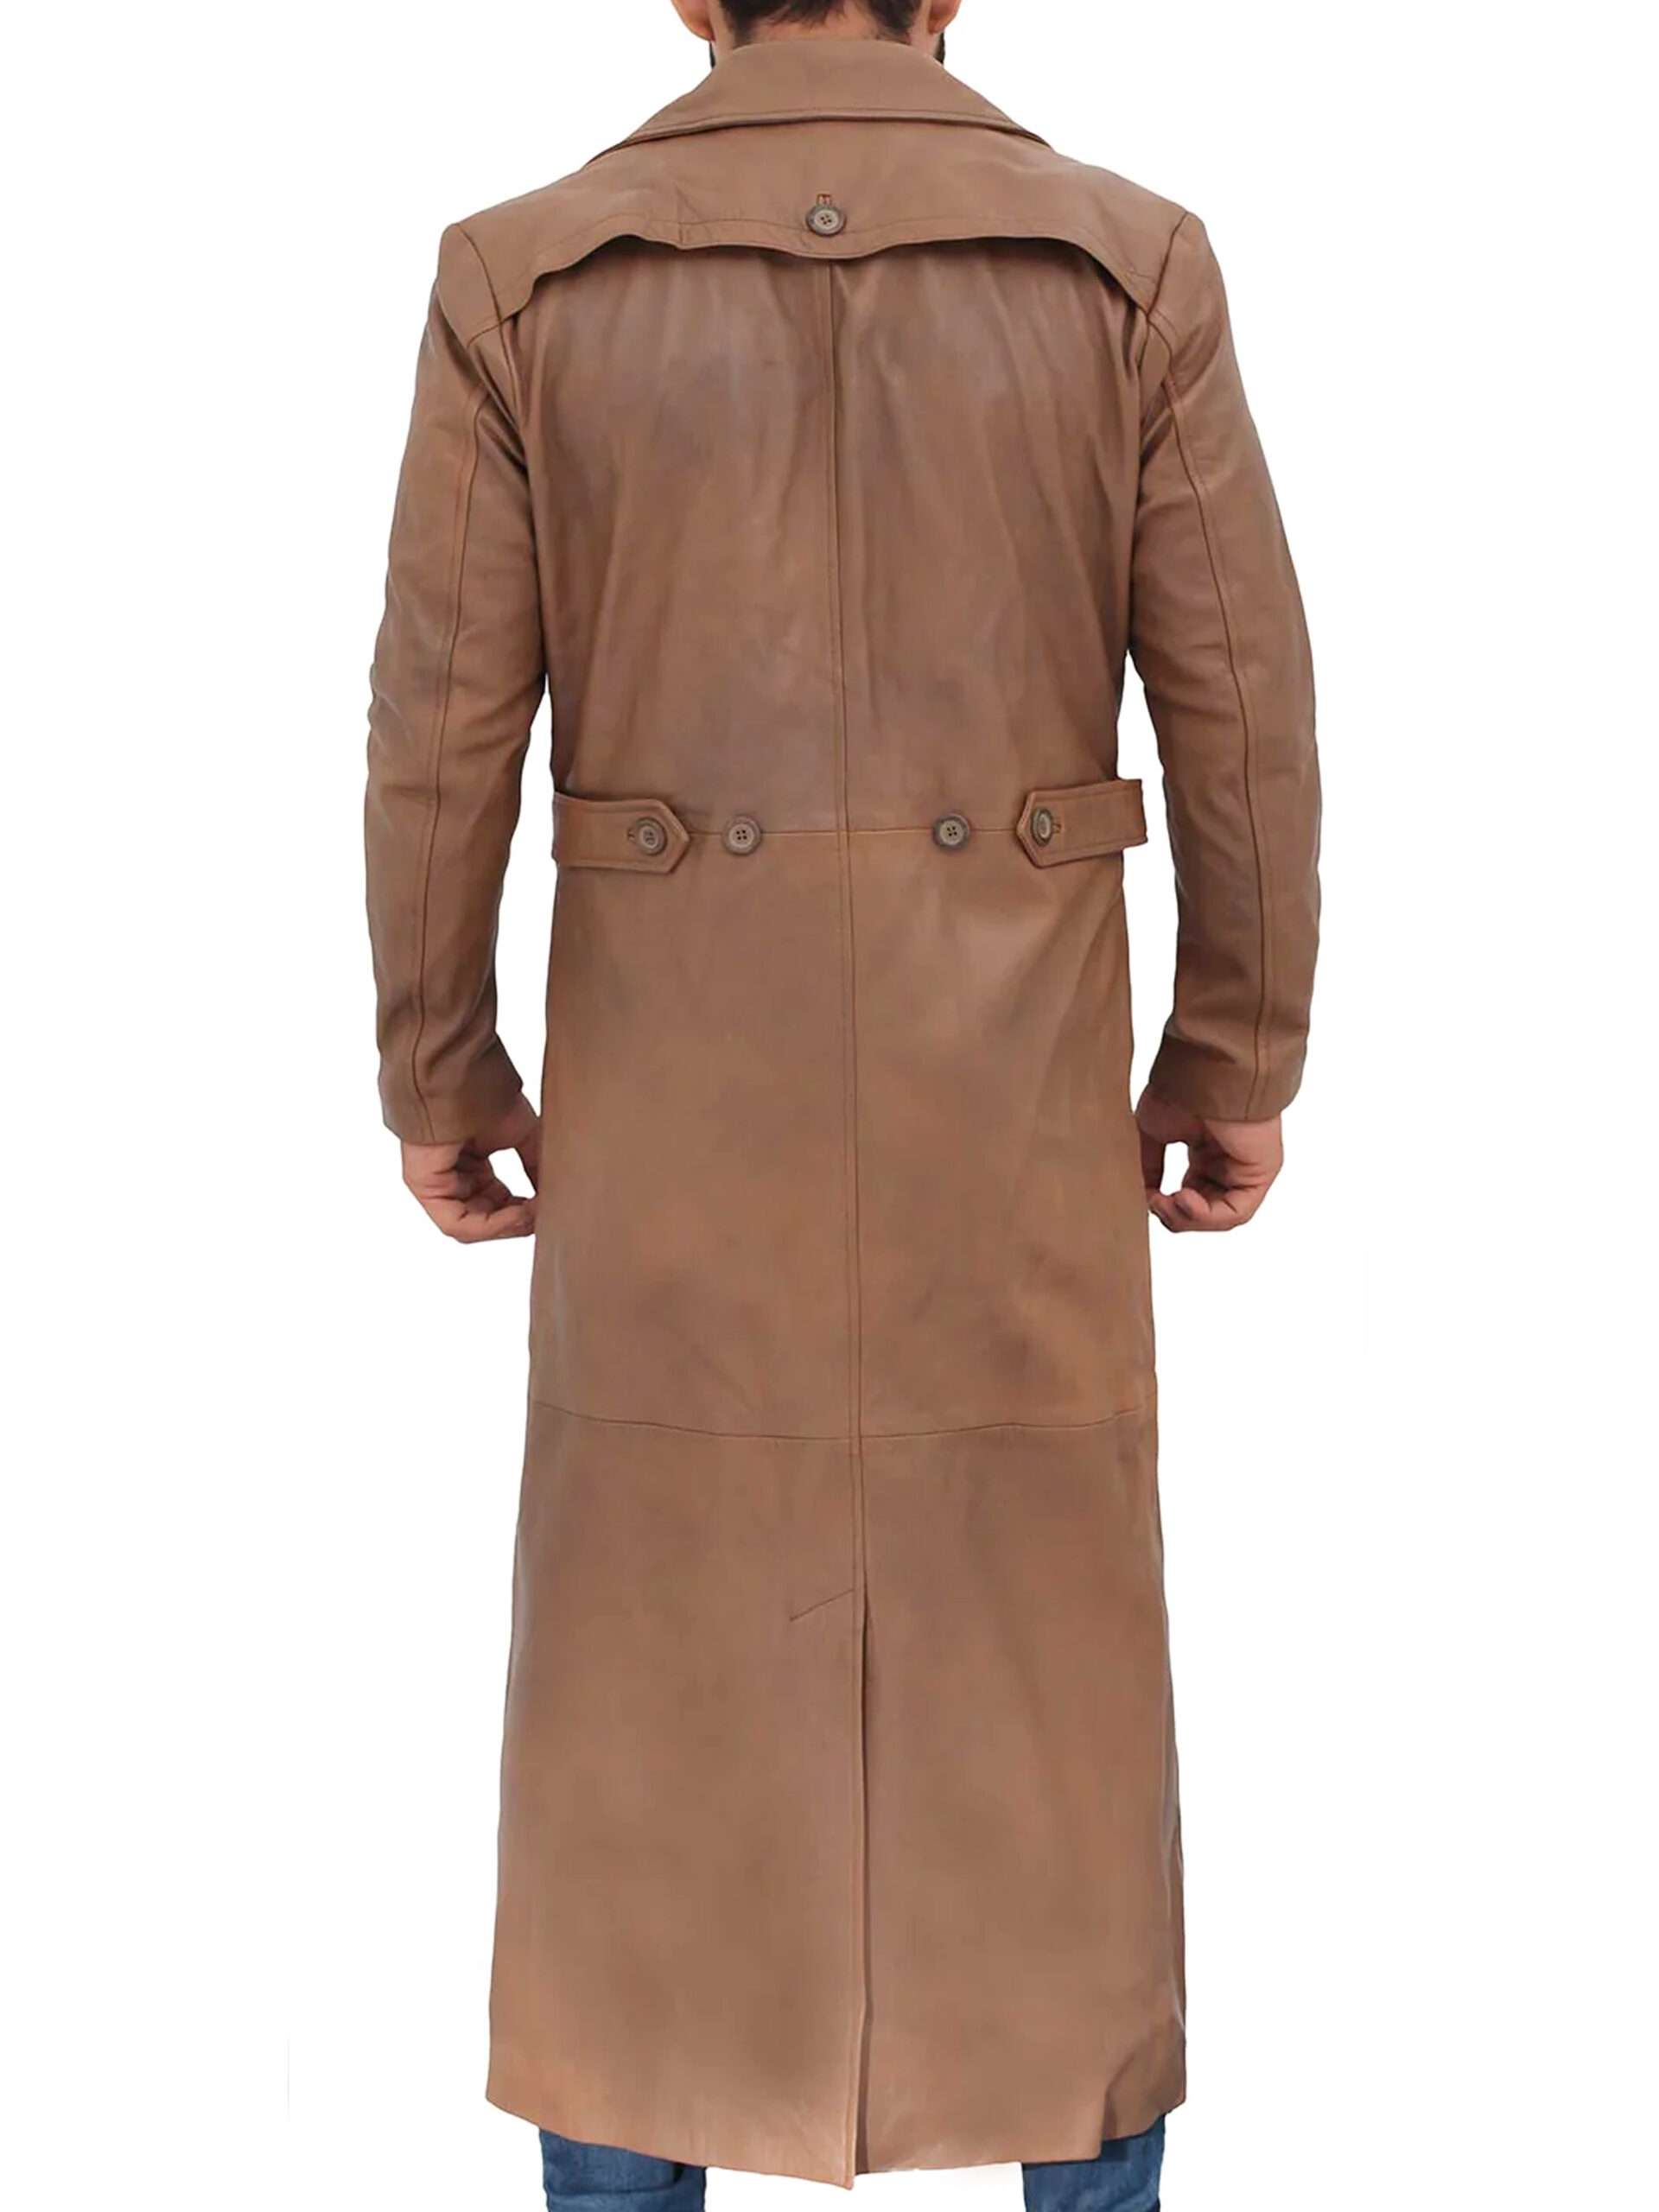 Jackson Distressed Brown Leather Trench Long Coat